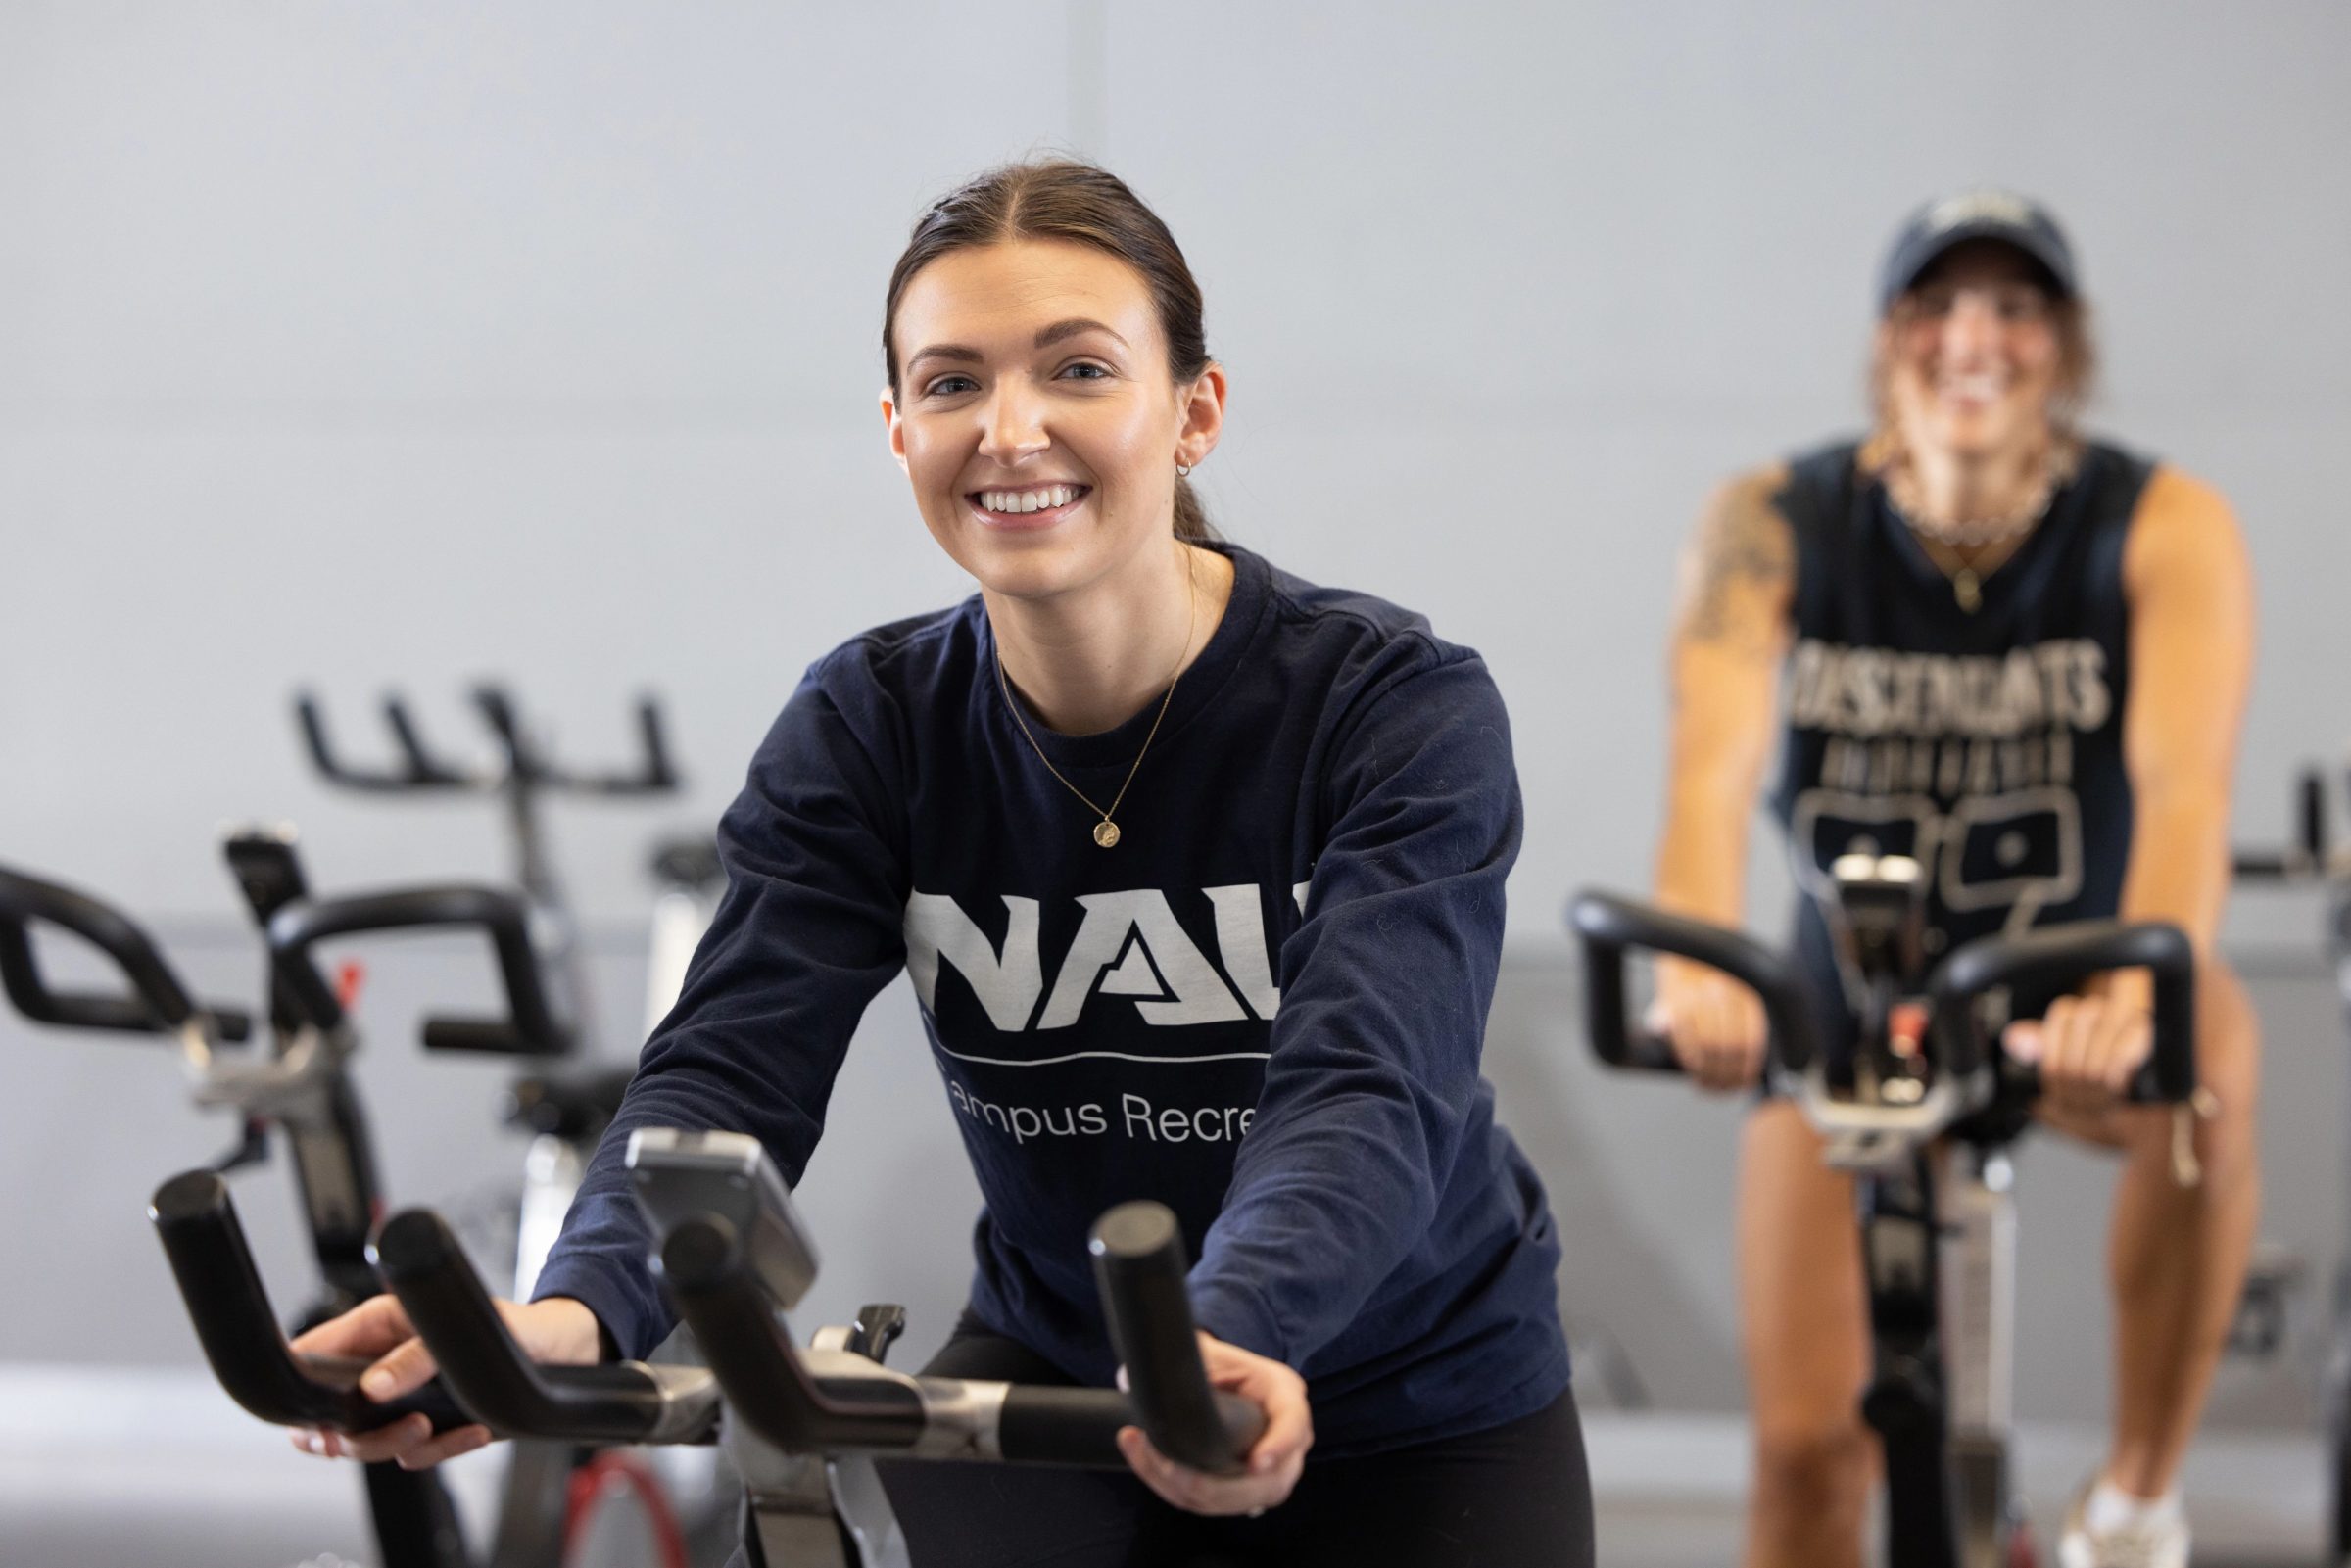 Student using an exercise bike smiling at the camera.